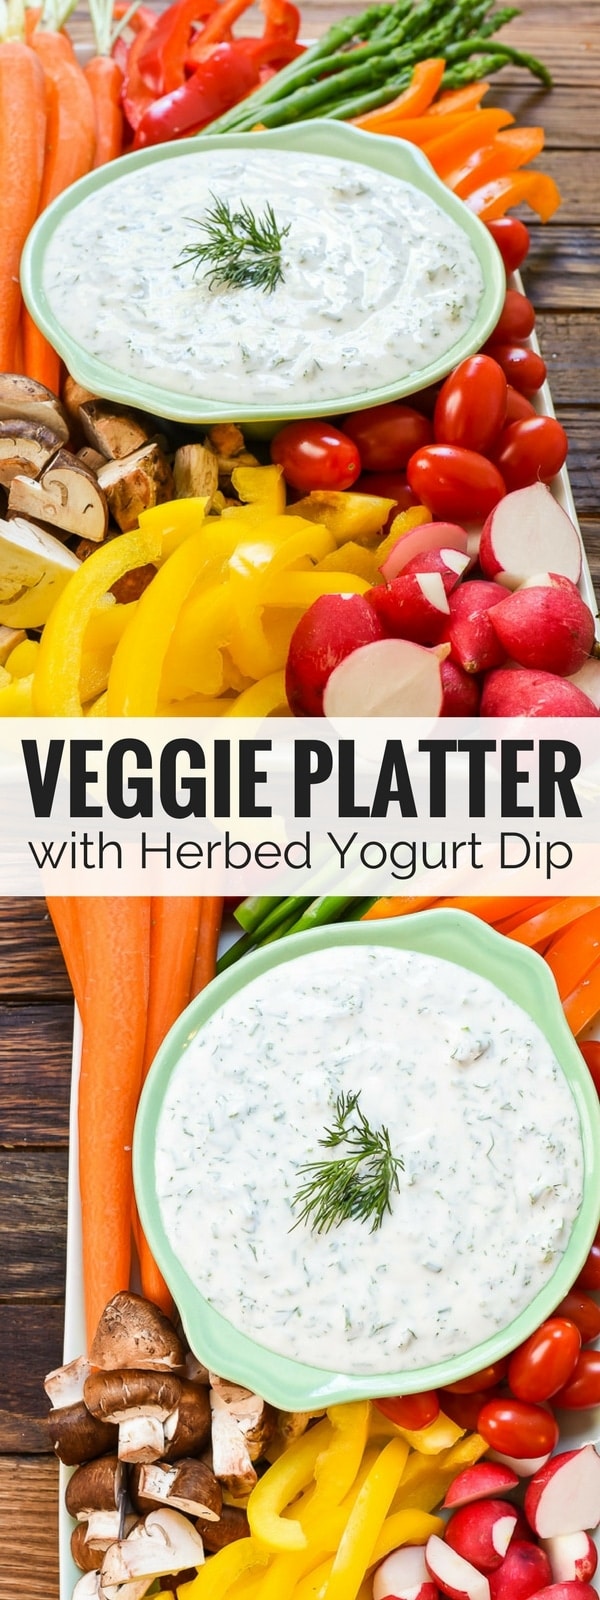 This spring inspired vegetable platter is made with the freshest, most colorful produce and paired with a quick herbed Greek yogurt dip for an appetizer everyone will love.